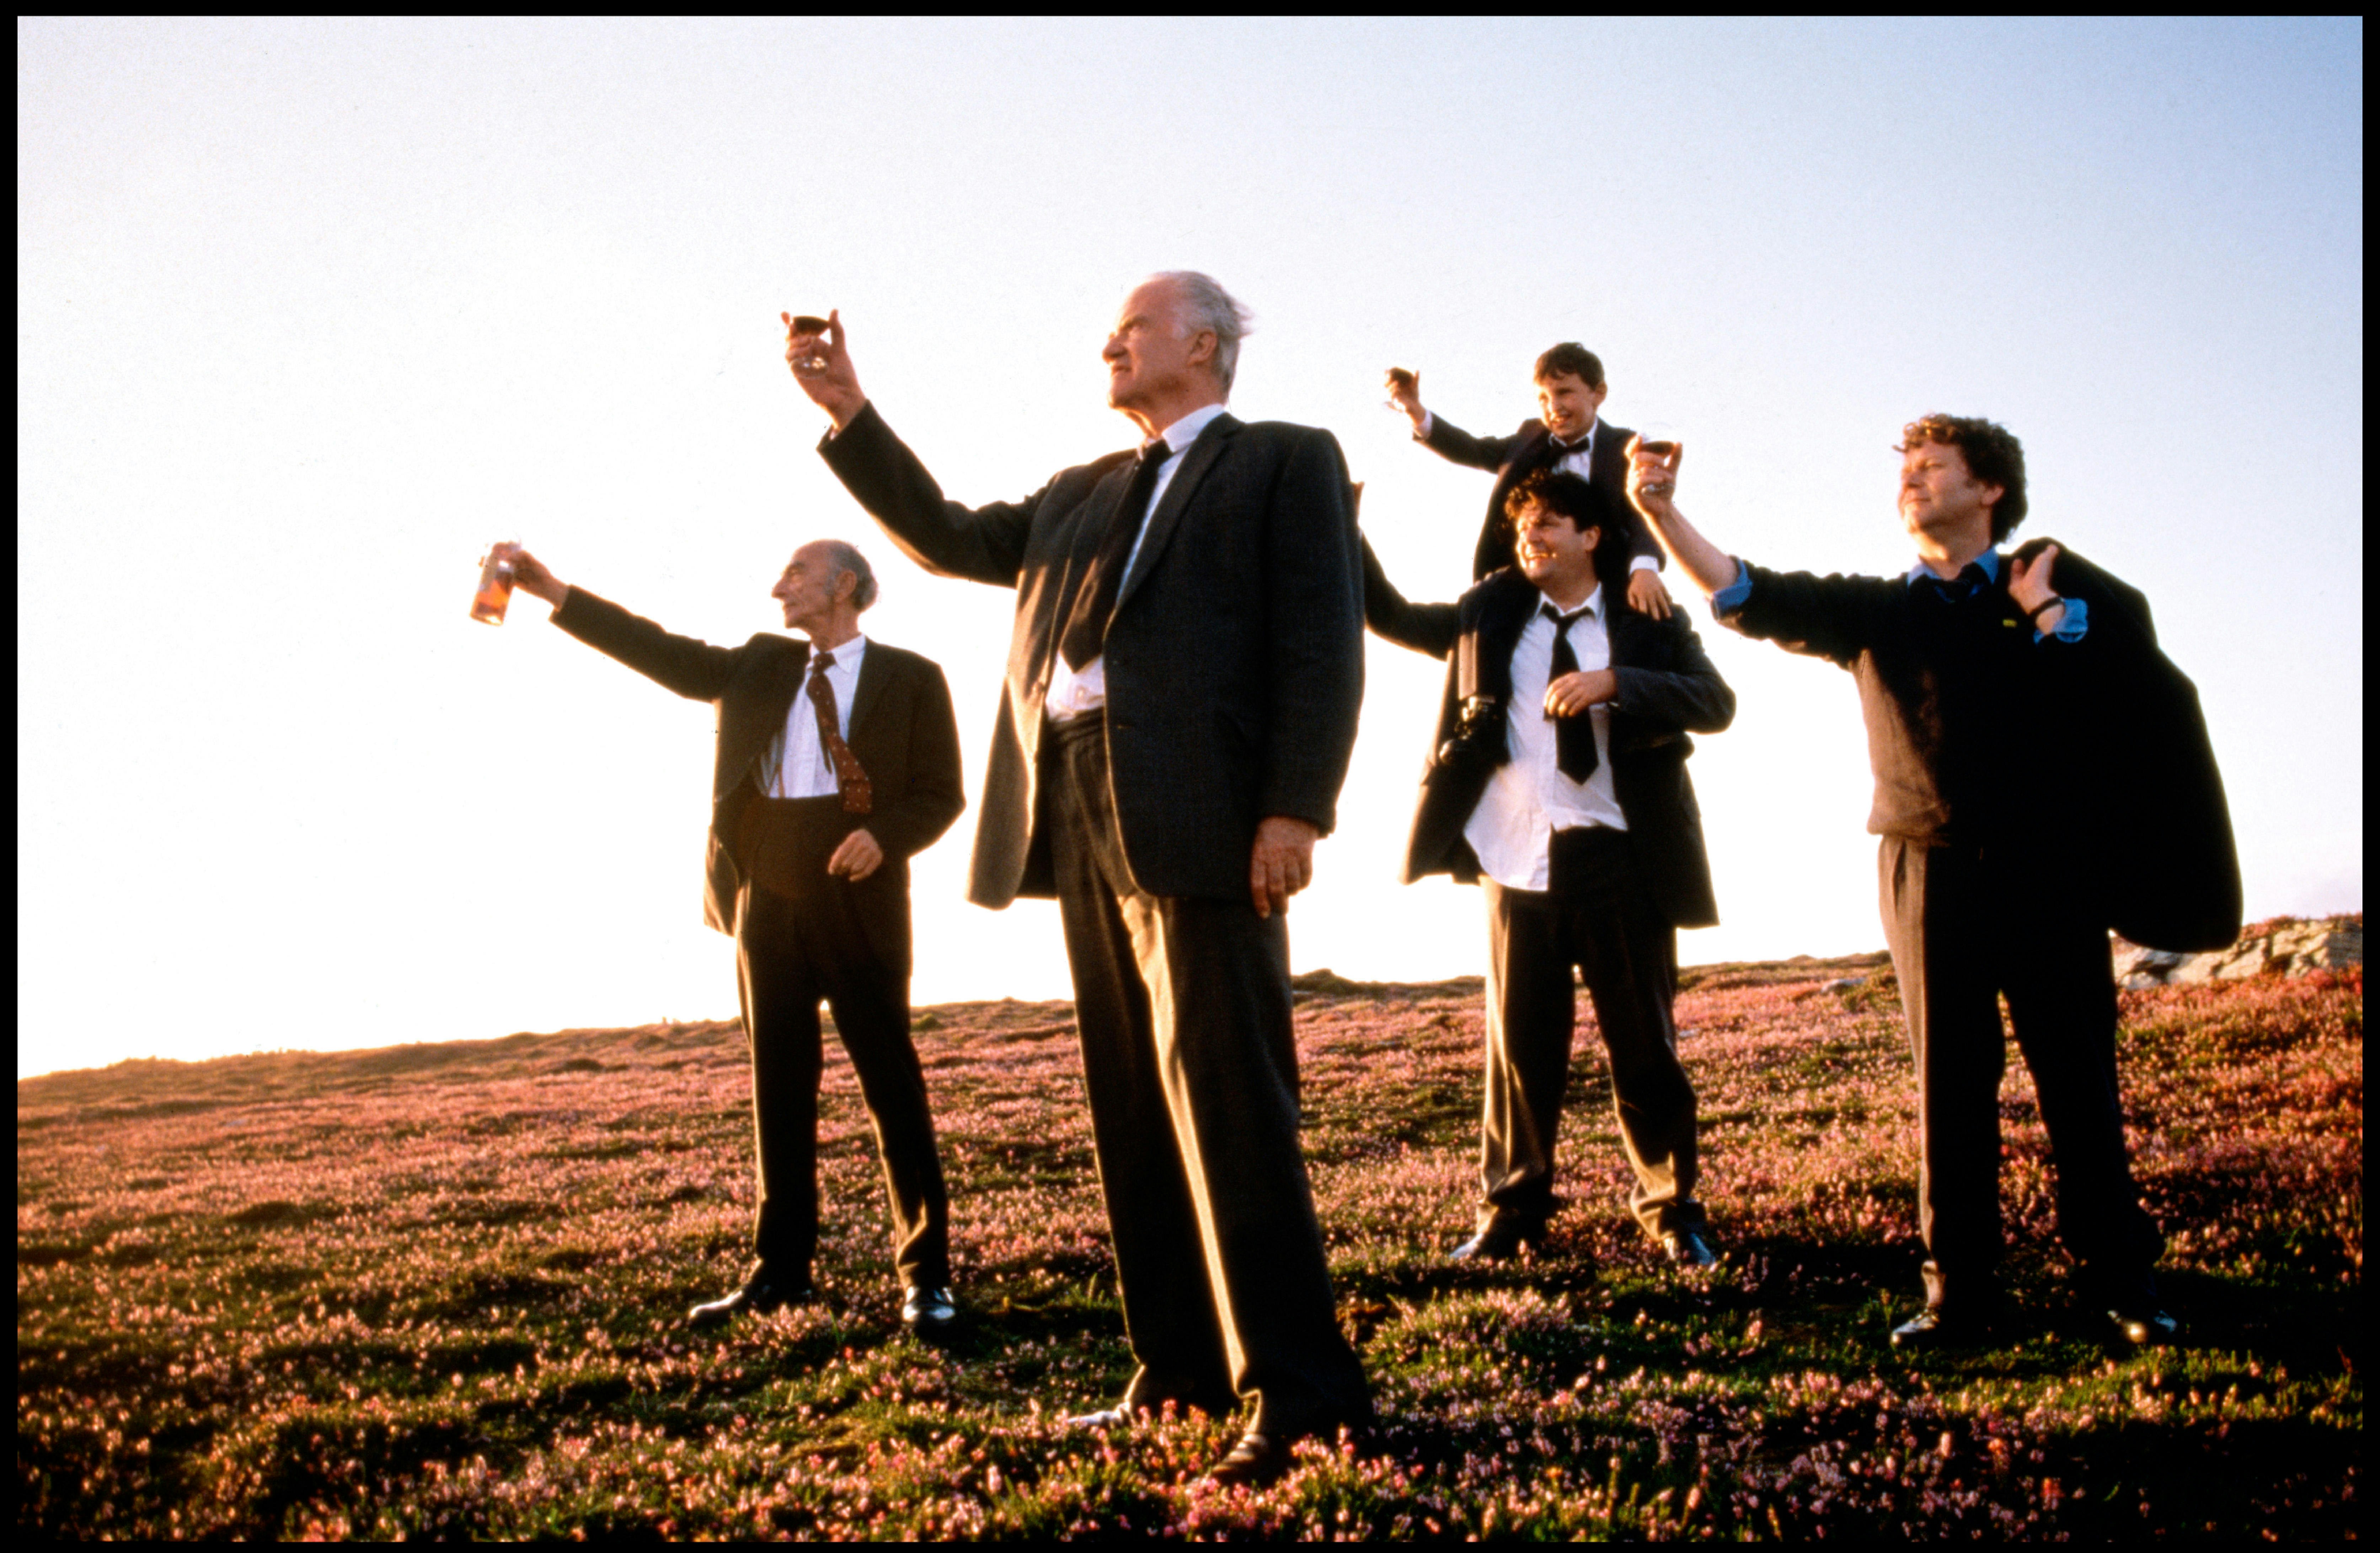 Four men and a boy raise a glass to the sky in the middle of a field. They are all wearong suit and looking in the same direction